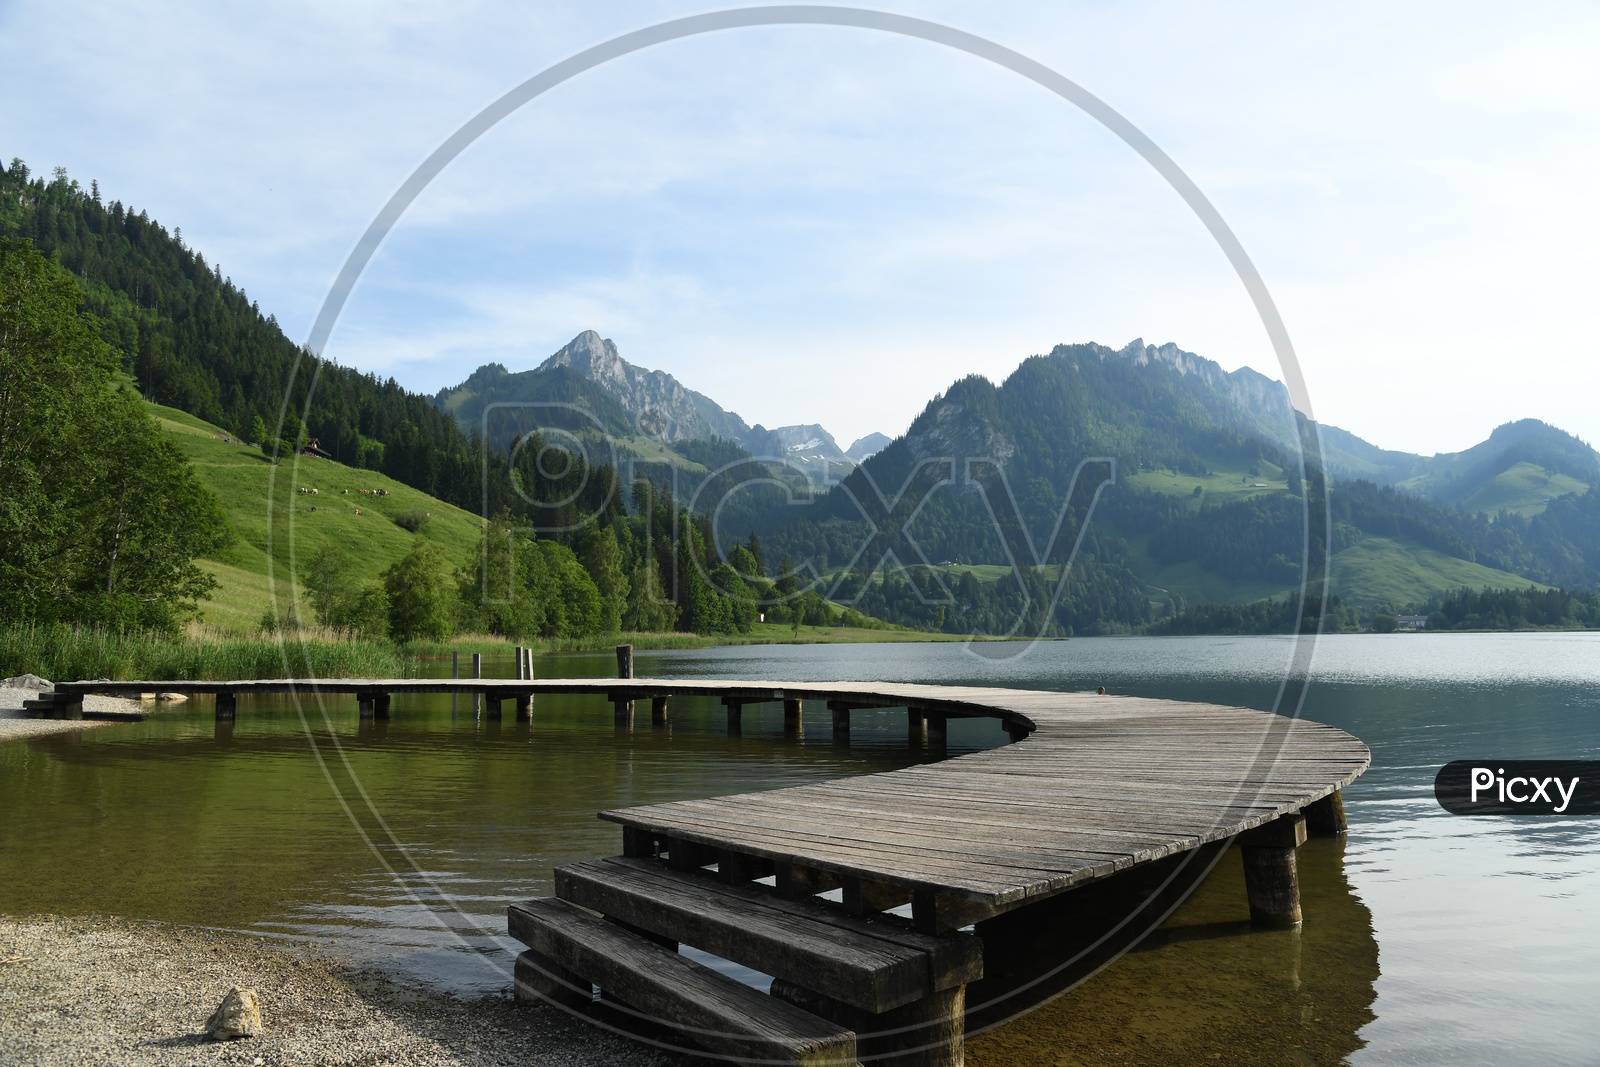 A Wooden Pier on Lake With Swiss Alps in Background